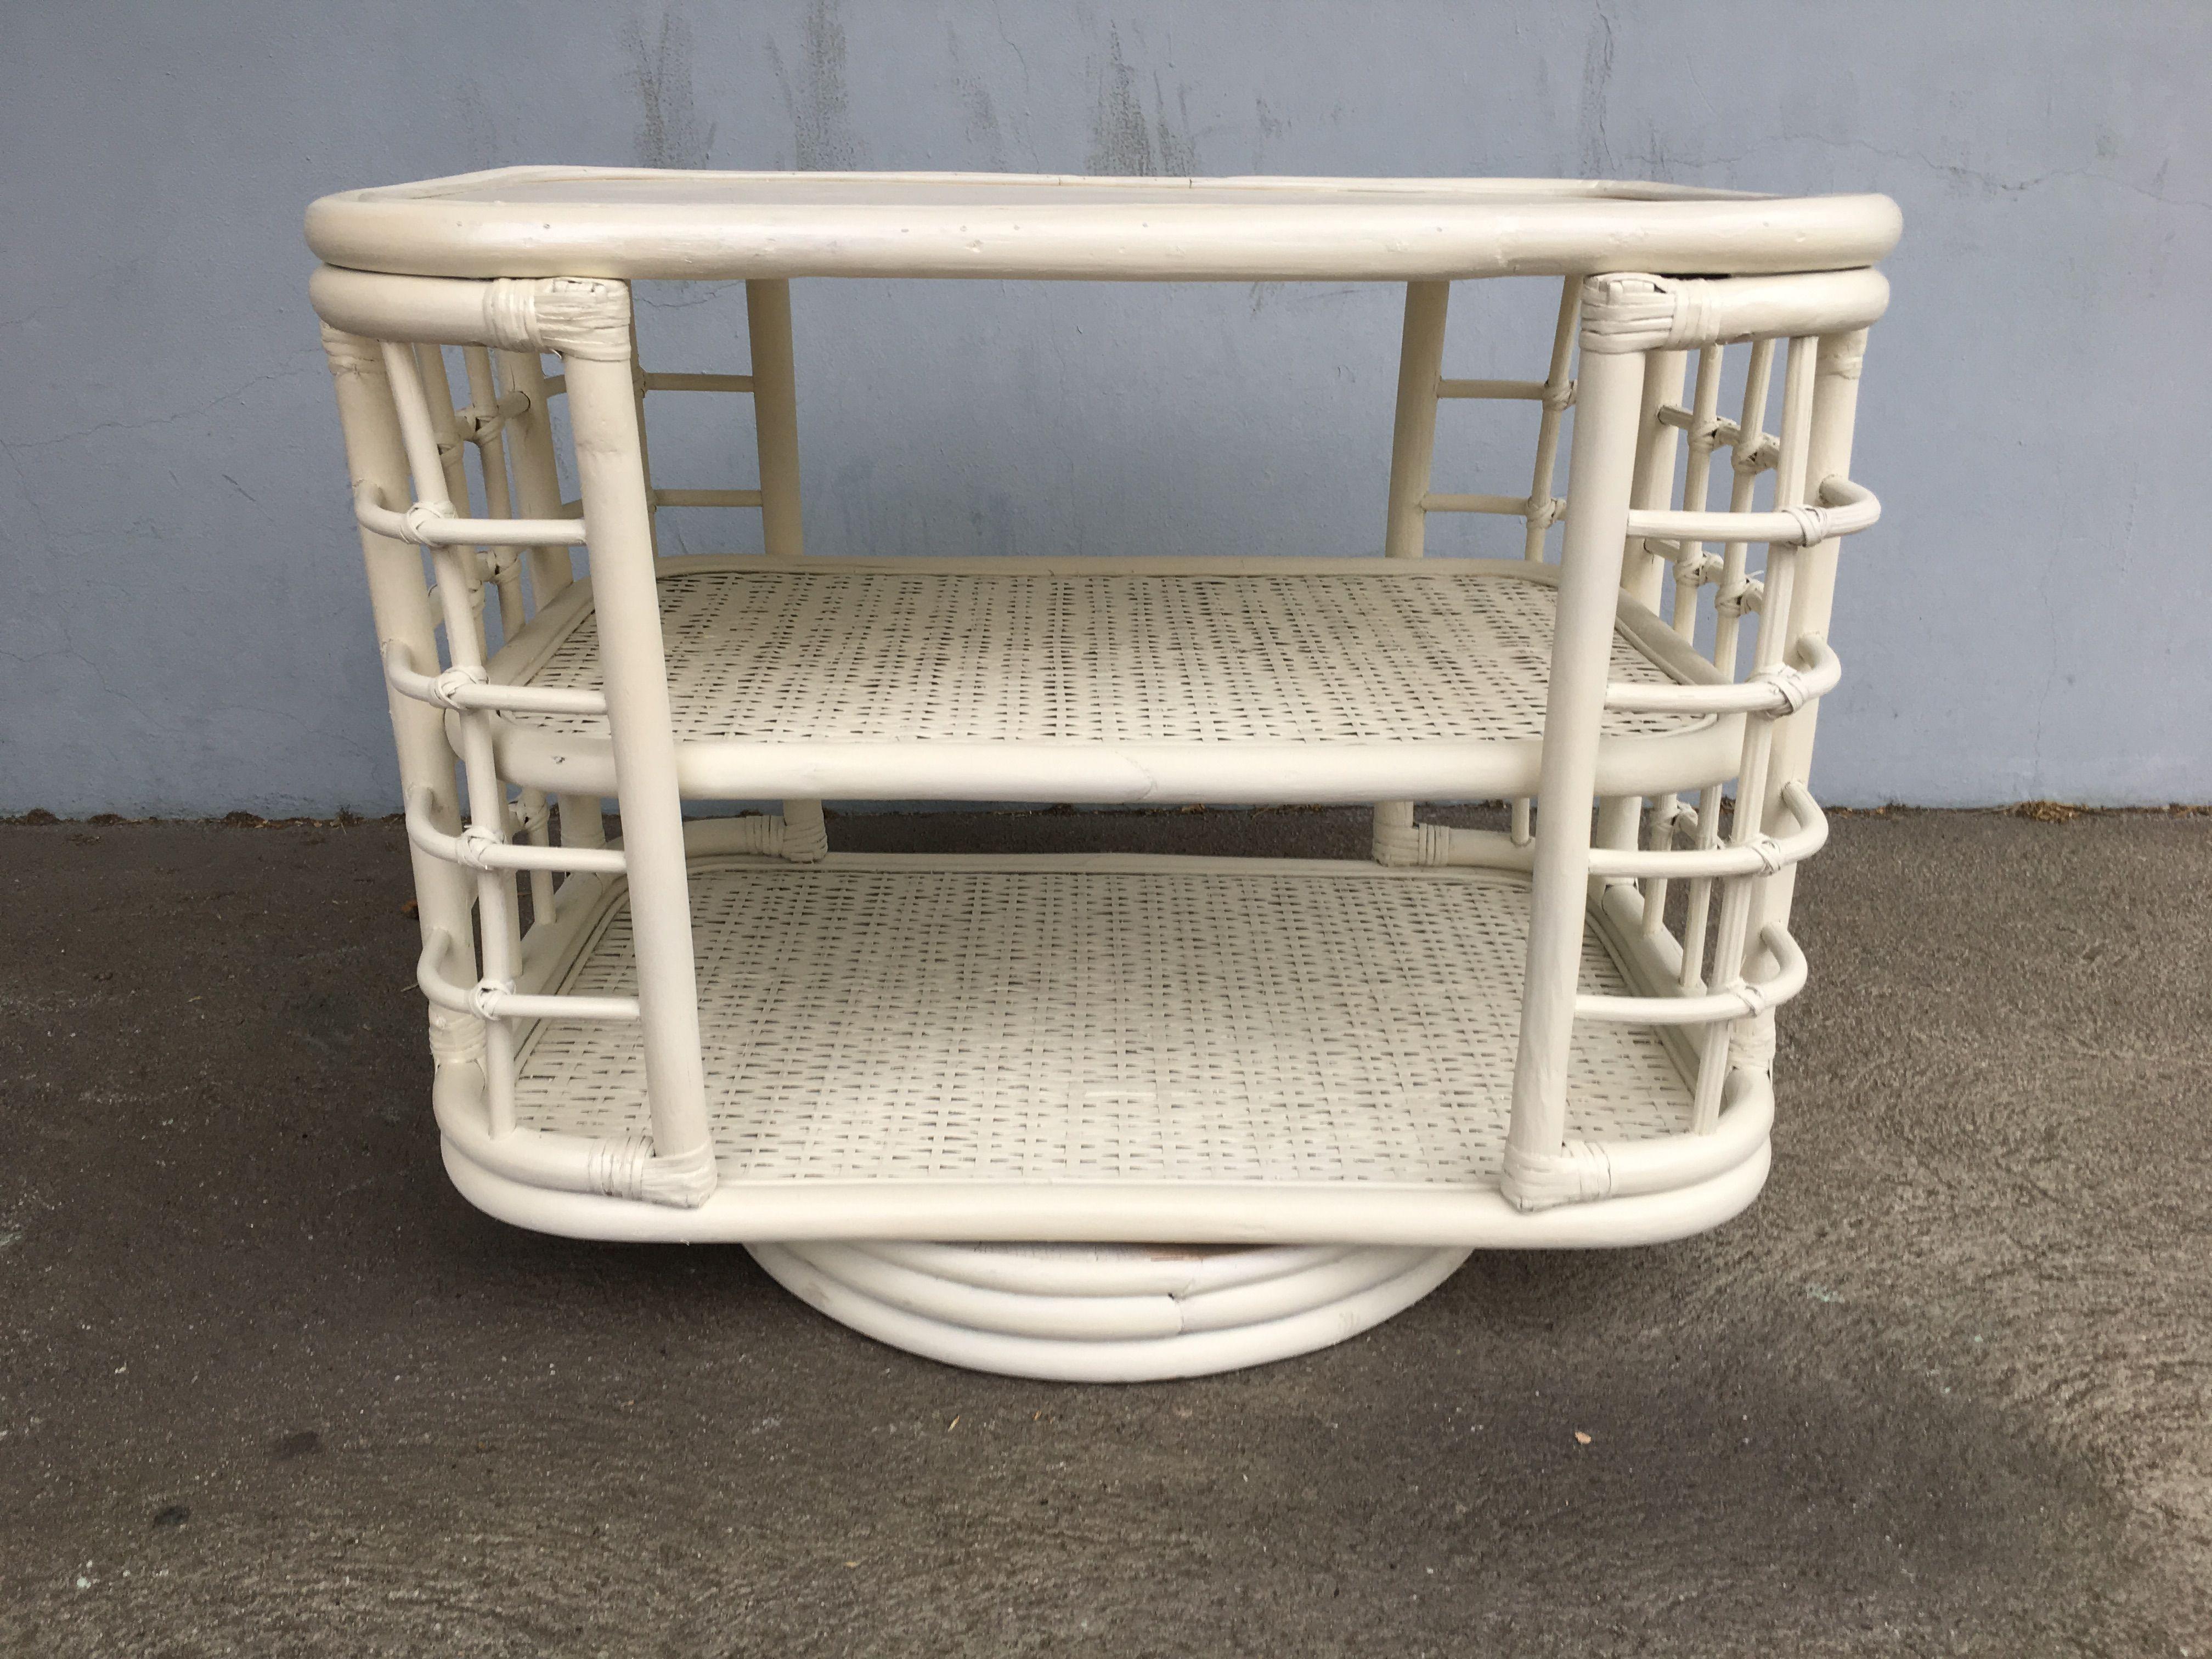 White painted midcentury era rattan side table bookshelf featuring two shelves with skeleton side walls and a swivel base for easy book location. Restored to new for you. All rattan, bamboo and wicker furniture has been painstakingly refurbished to